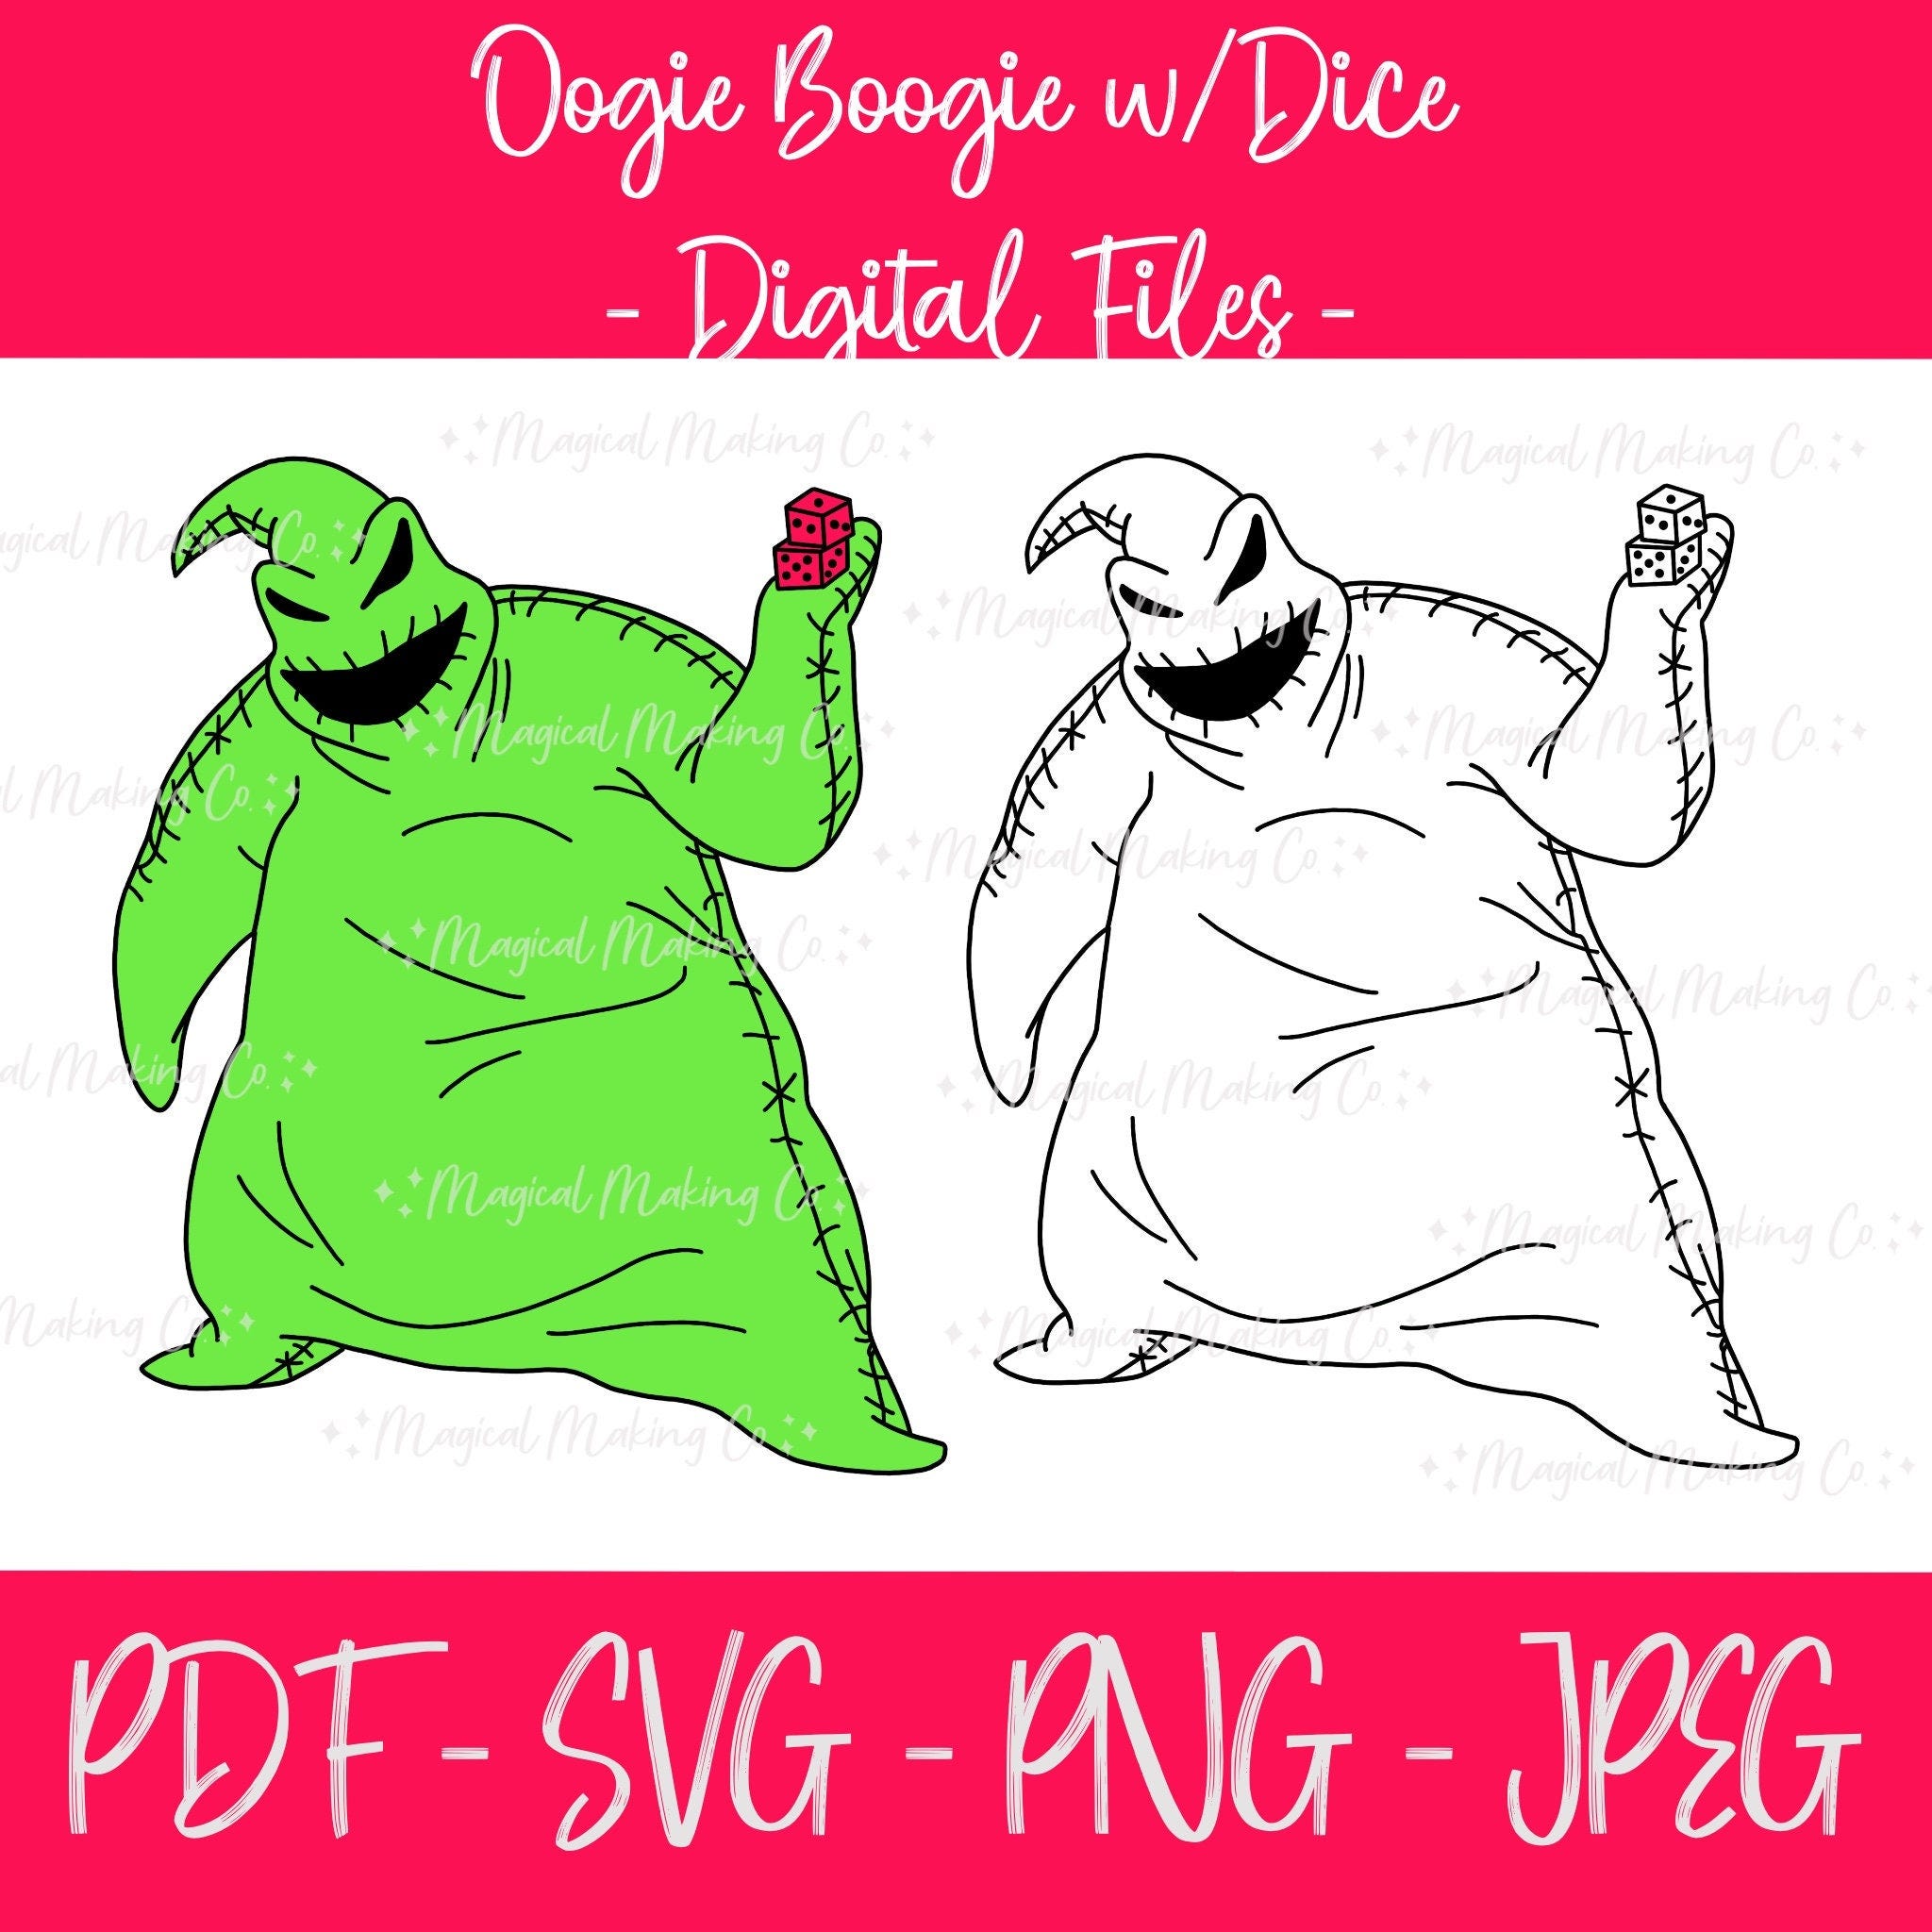 Oogie Boogie with Dice Digital Files (The Nightmare Before Christmas) - SVG/PDF/PNG/Jpeg - Halloween Coloring Pages, Kids Coloring Pages